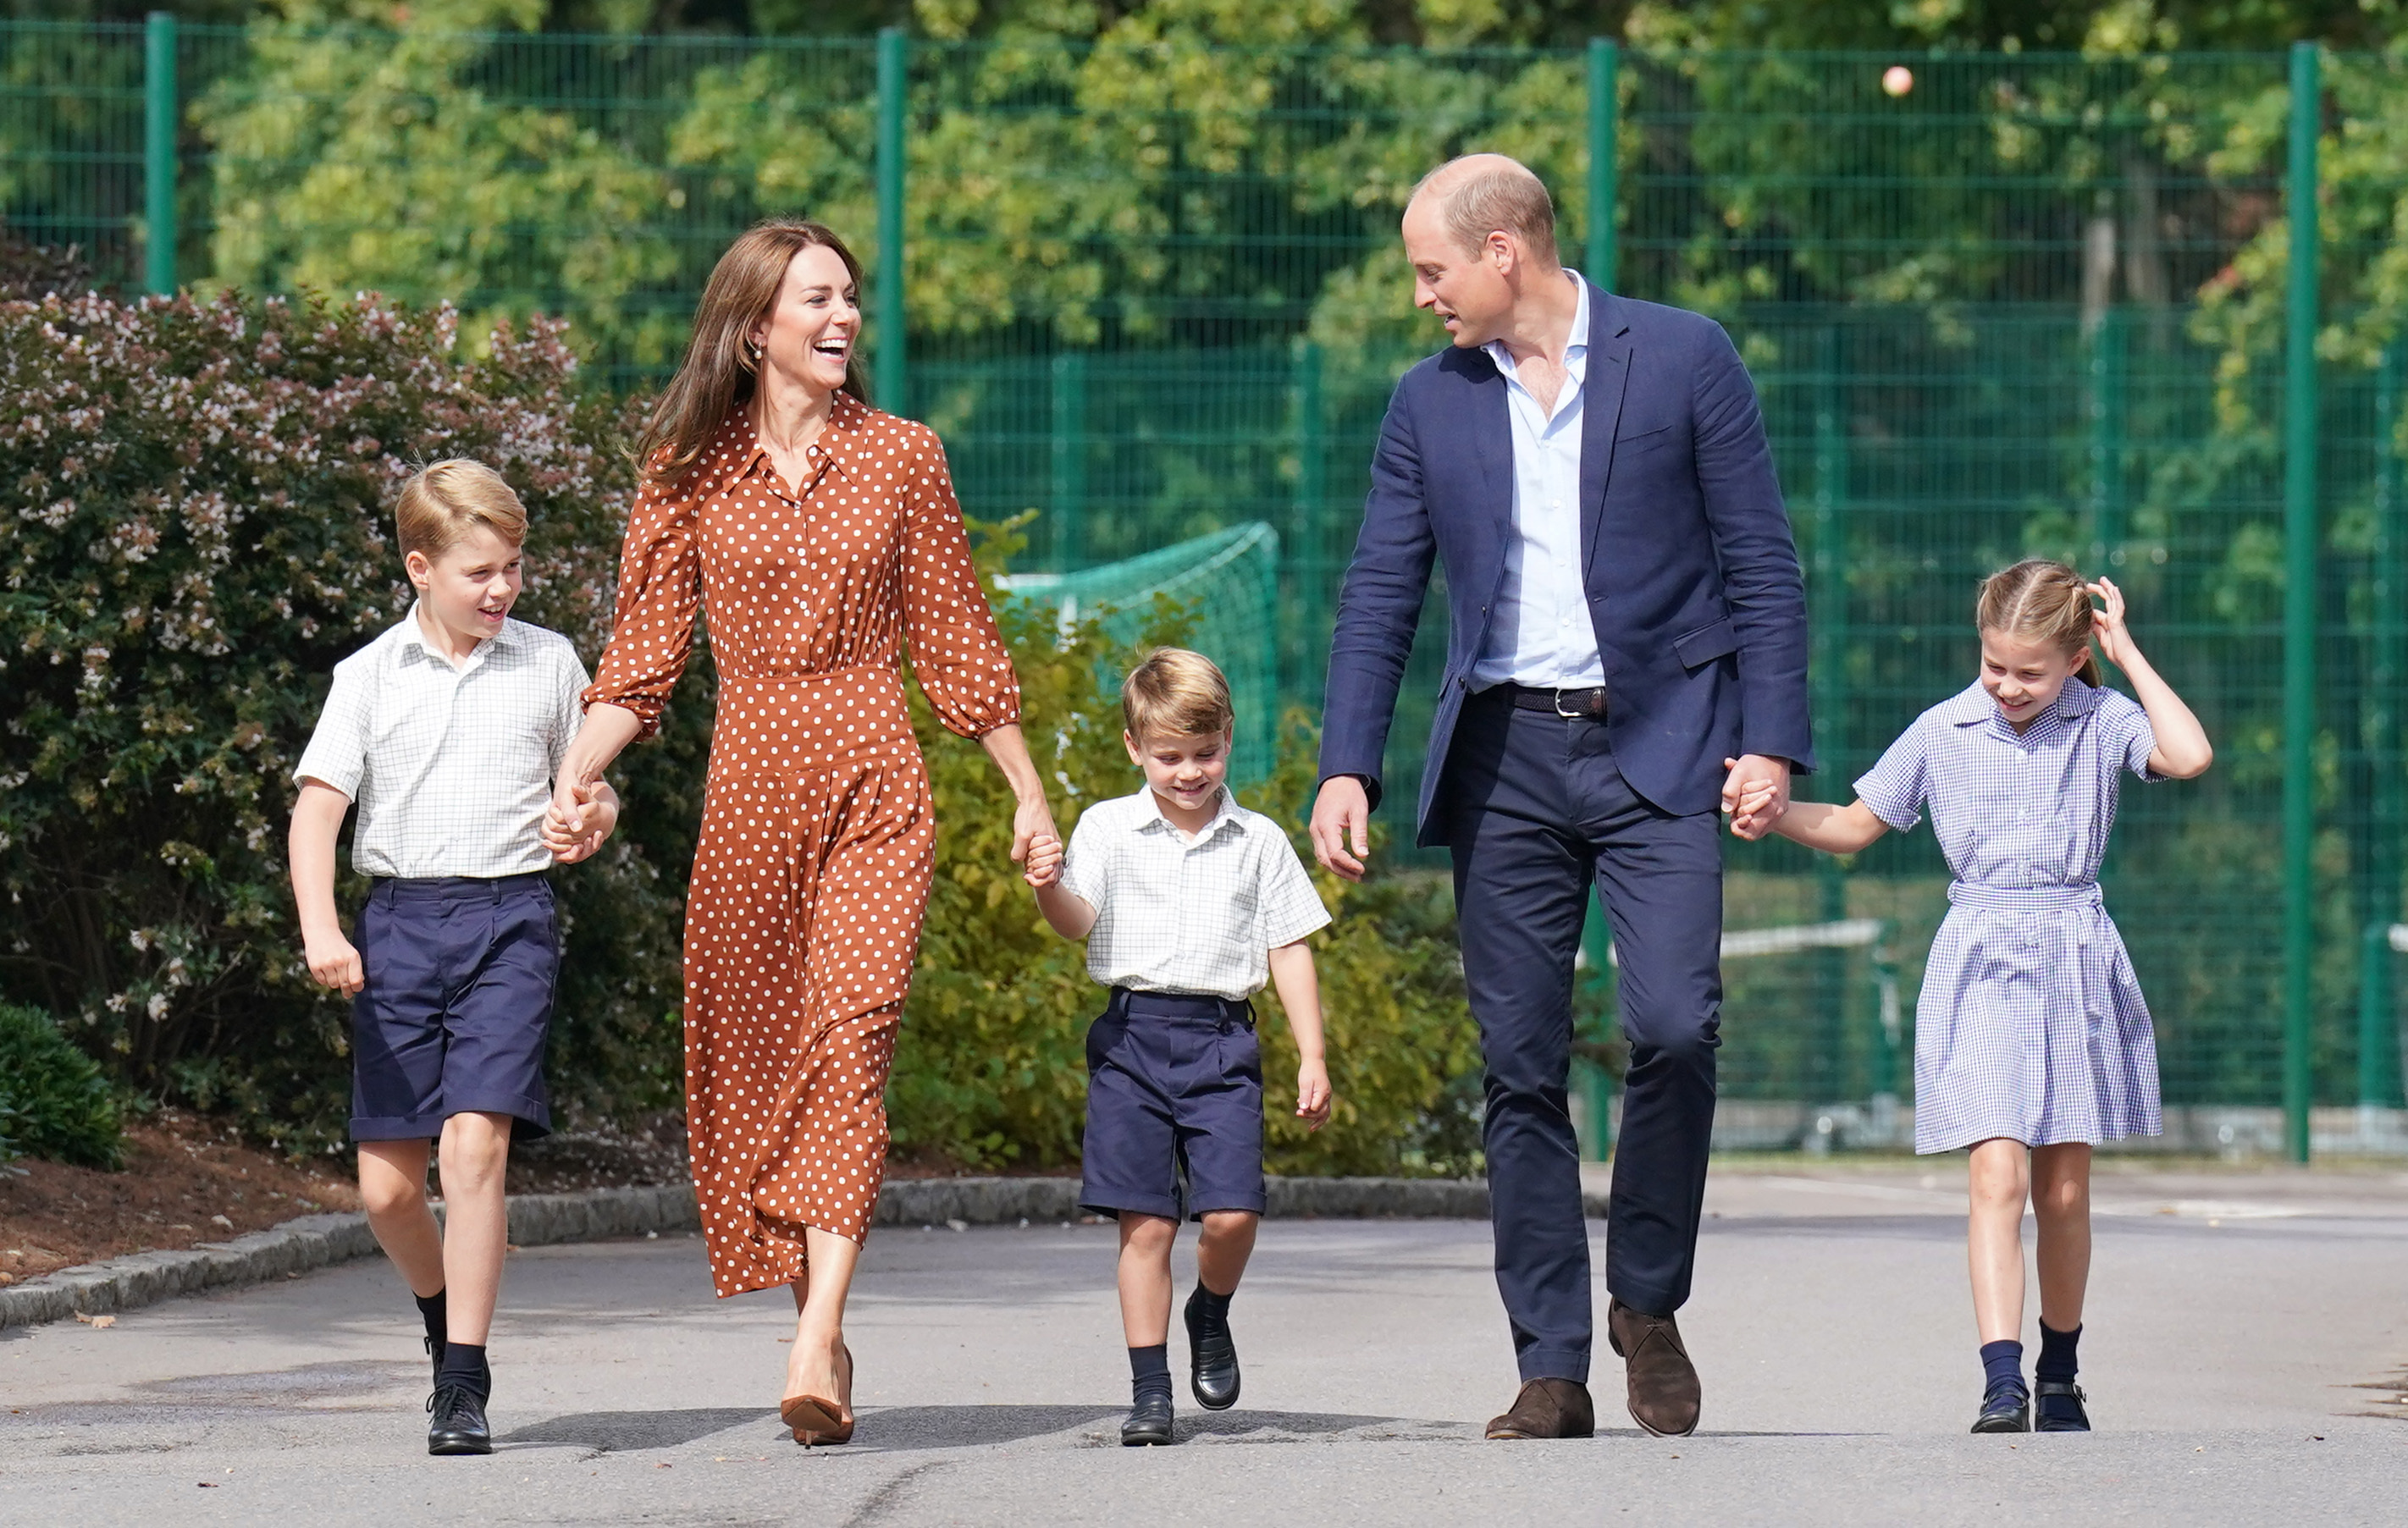 Prince George, Princess Charlotte and Prince Louis, accompanied by their parents the Duke and Duchess of Cambridge